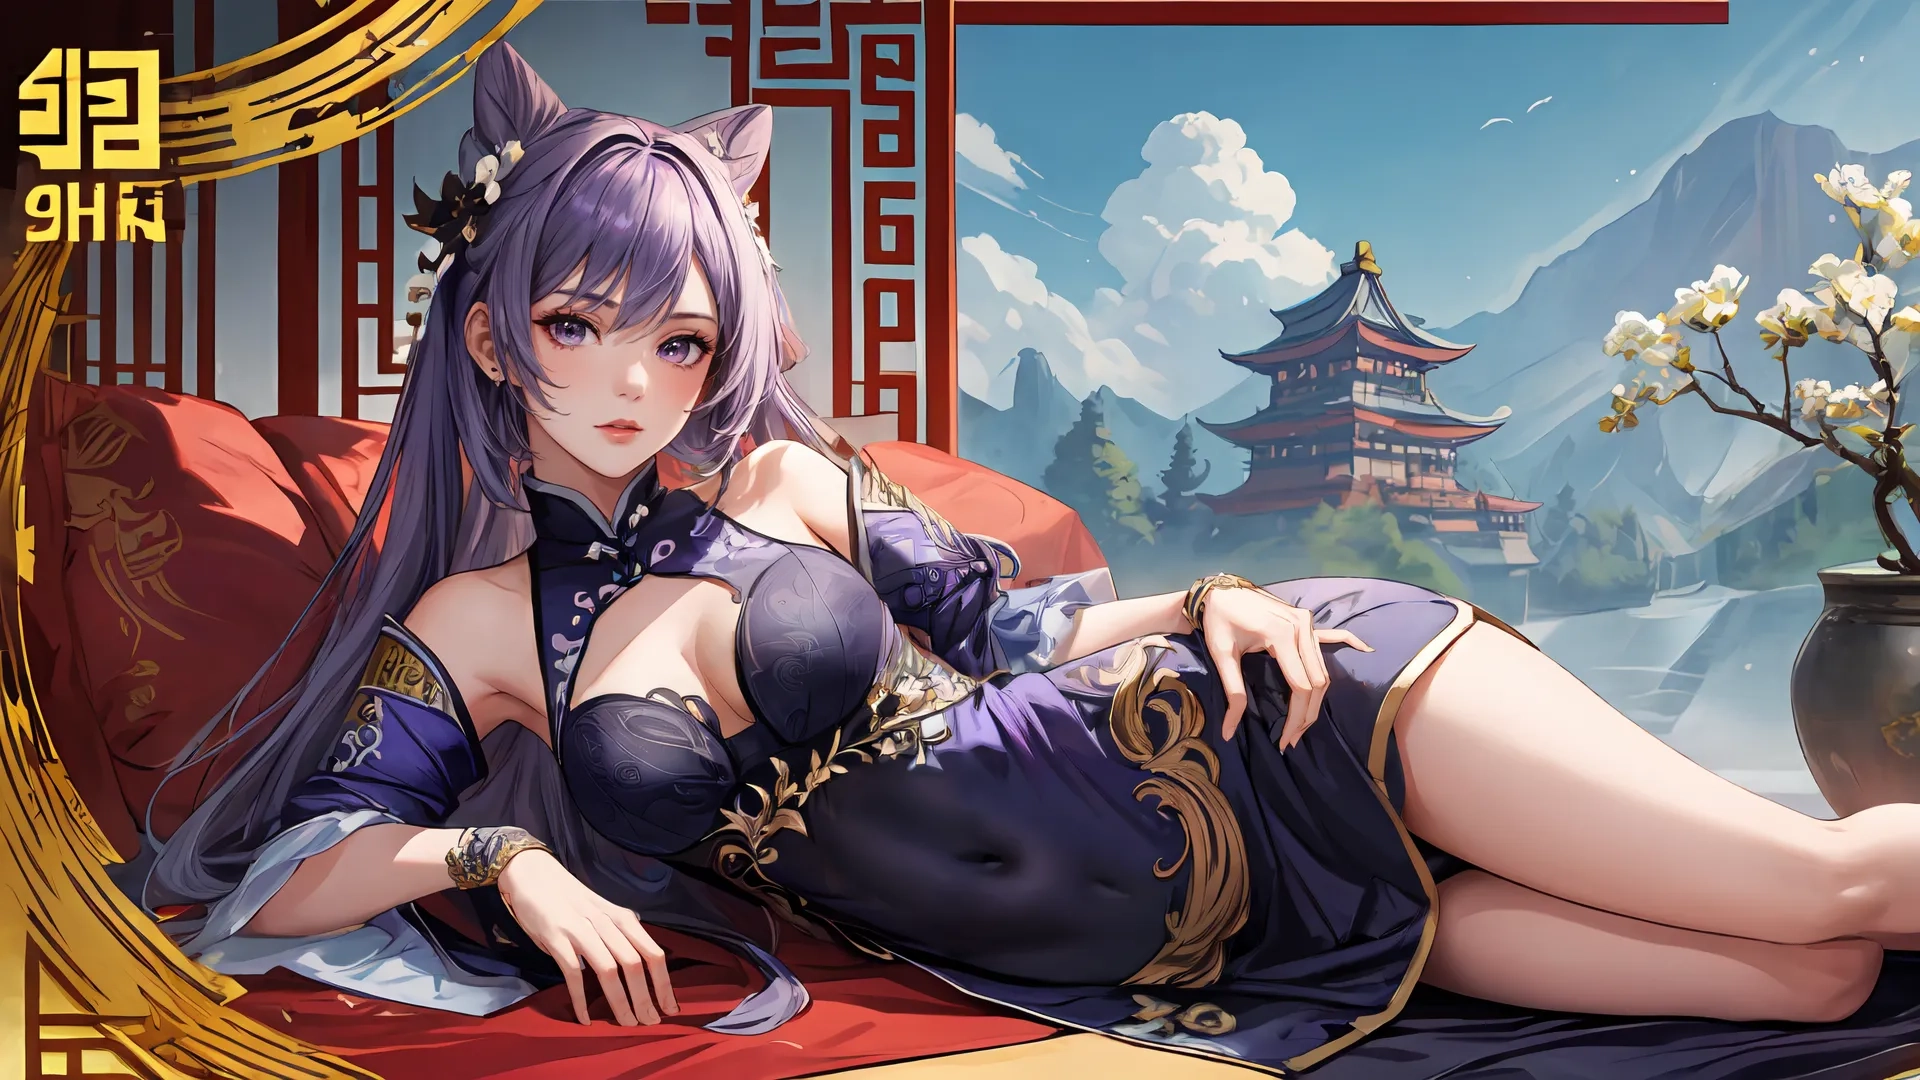 a painting of a sexy woman in purple sitting next to trees with white flowers in a japanese palace setting and building behind her is a fountain
